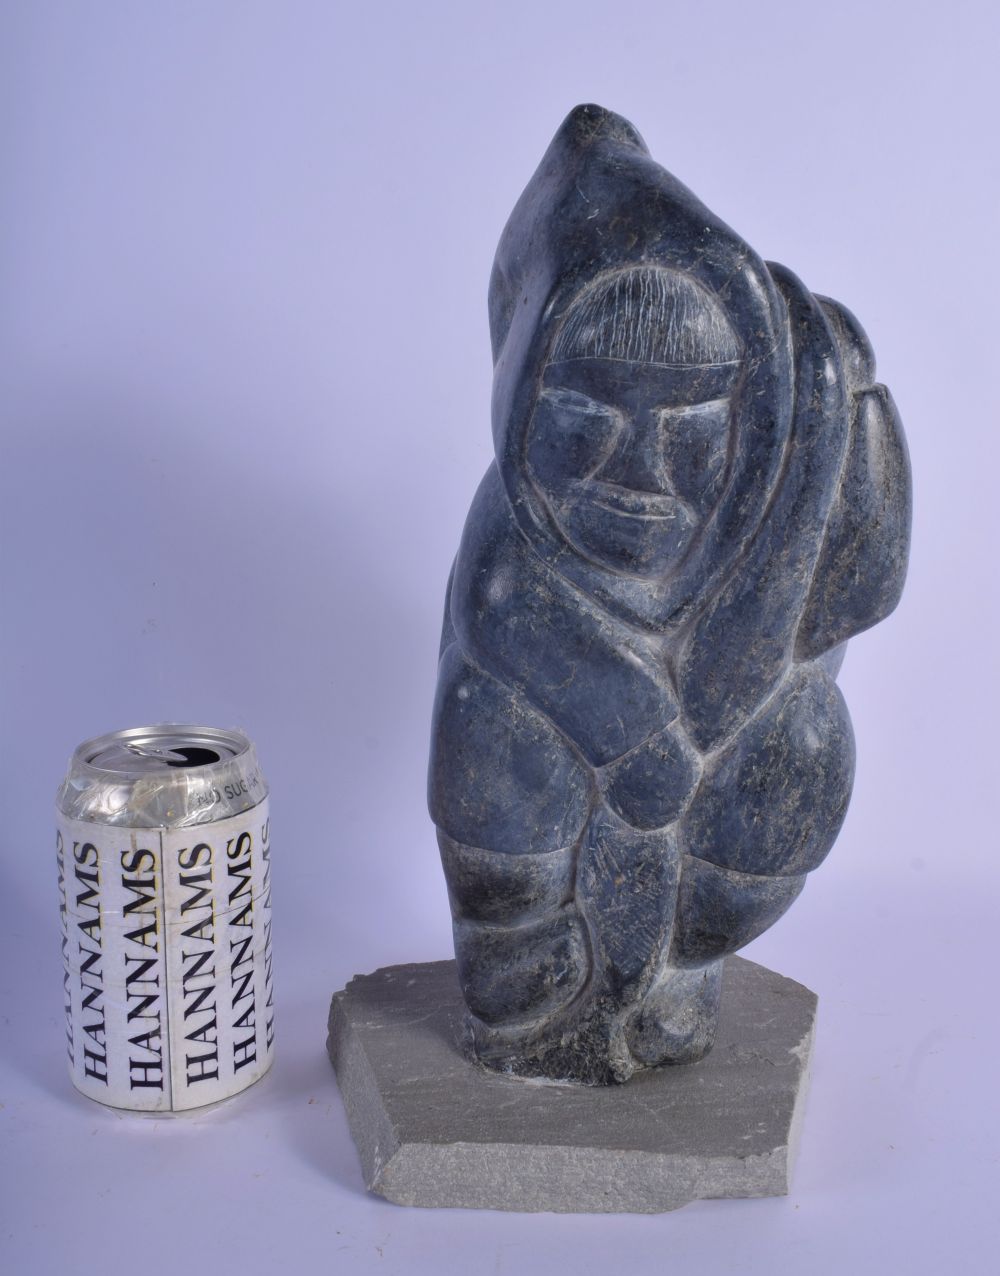 A LARGE NATIVE AMERICAN CANADIAN INUIT CARVED STONE FIGURE modelled holding a fish upon a stone base